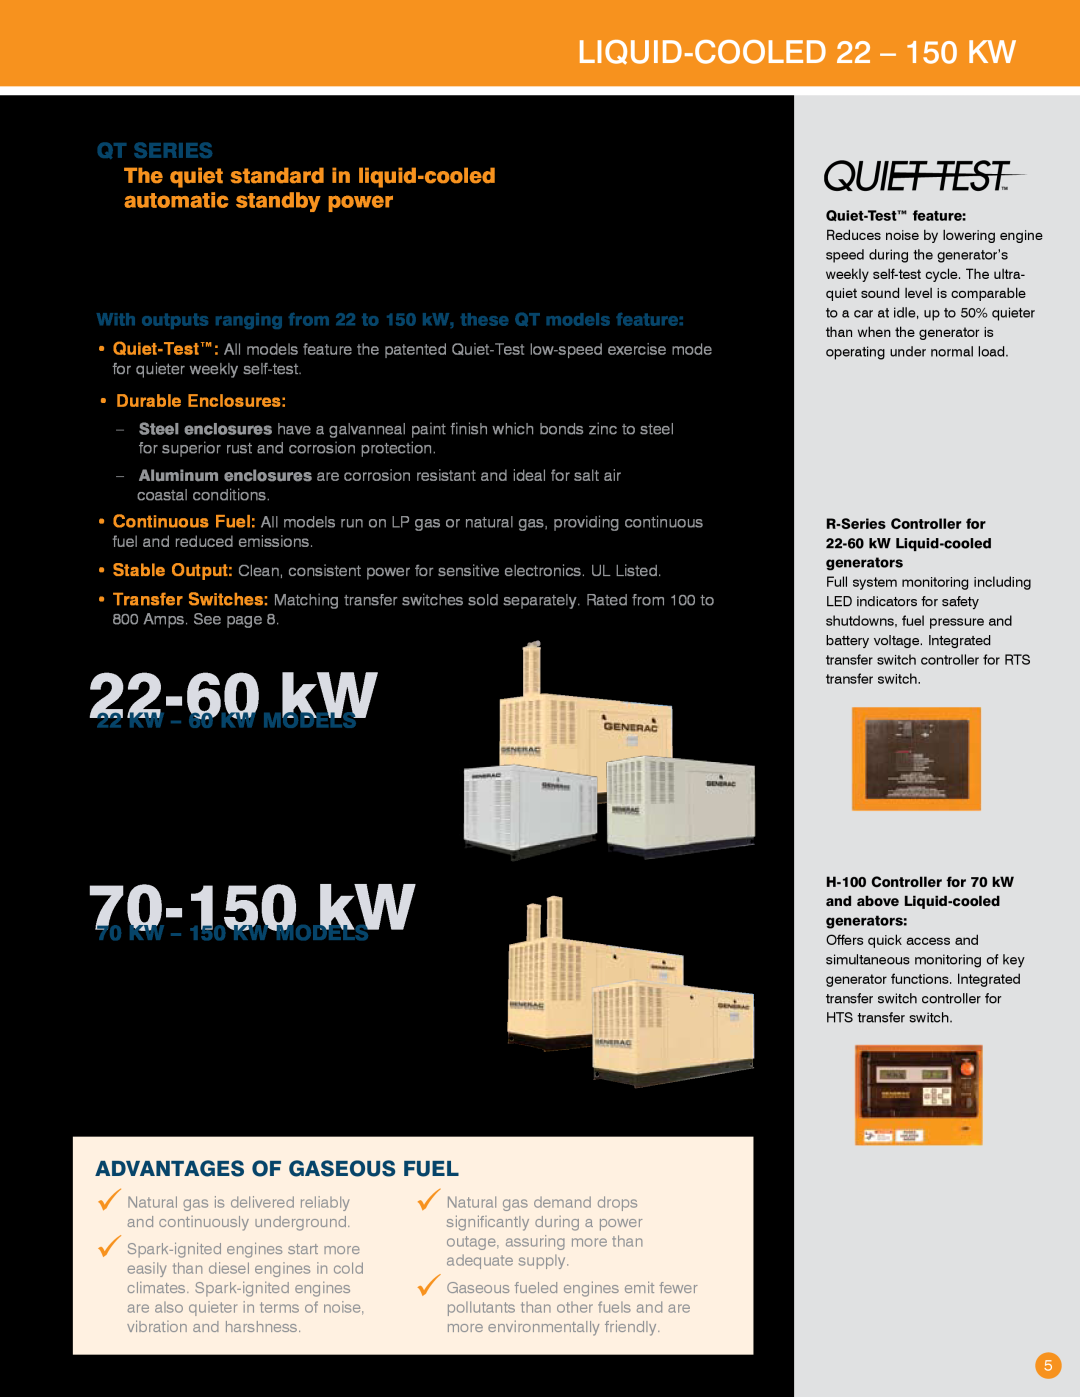 Generac Power Systems Transfer Switches and Accessories 22-60kW, 70-150kW, Liquid-cooled22 - 150 kW, Durable Enclosures 